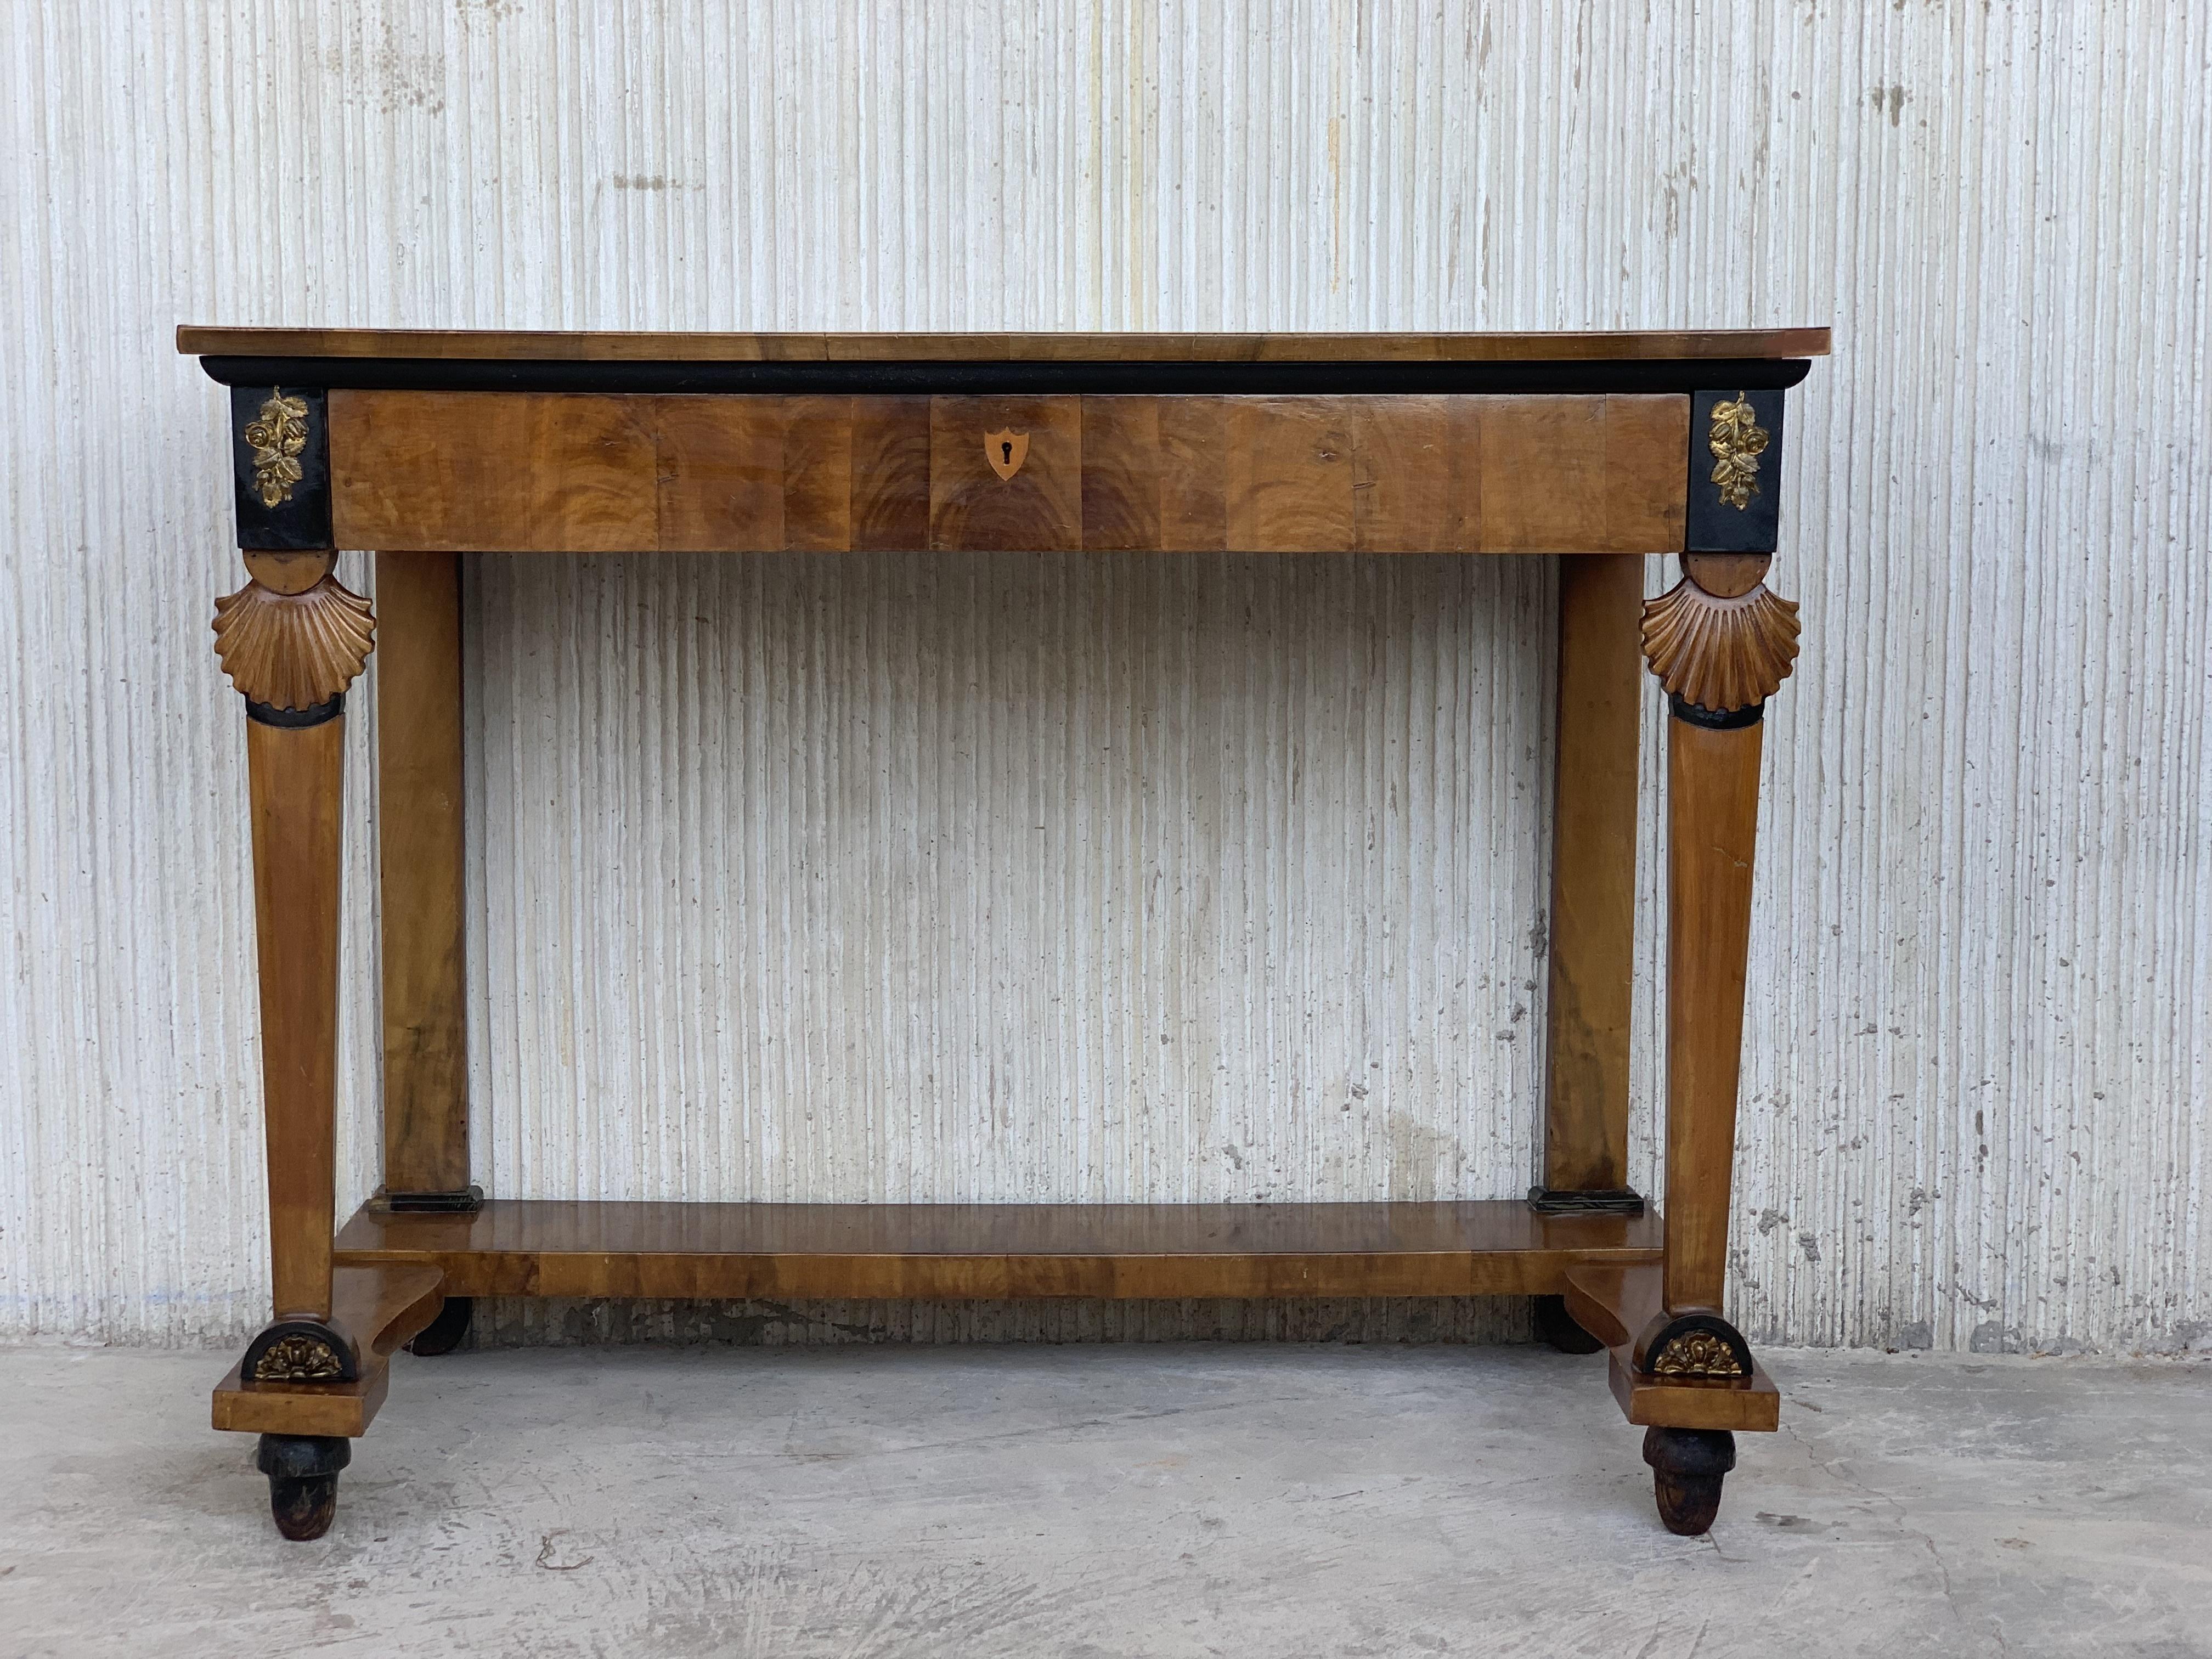 Spanish Antique French Empire Fruitwood Console Table with drawer, Early 19th Century